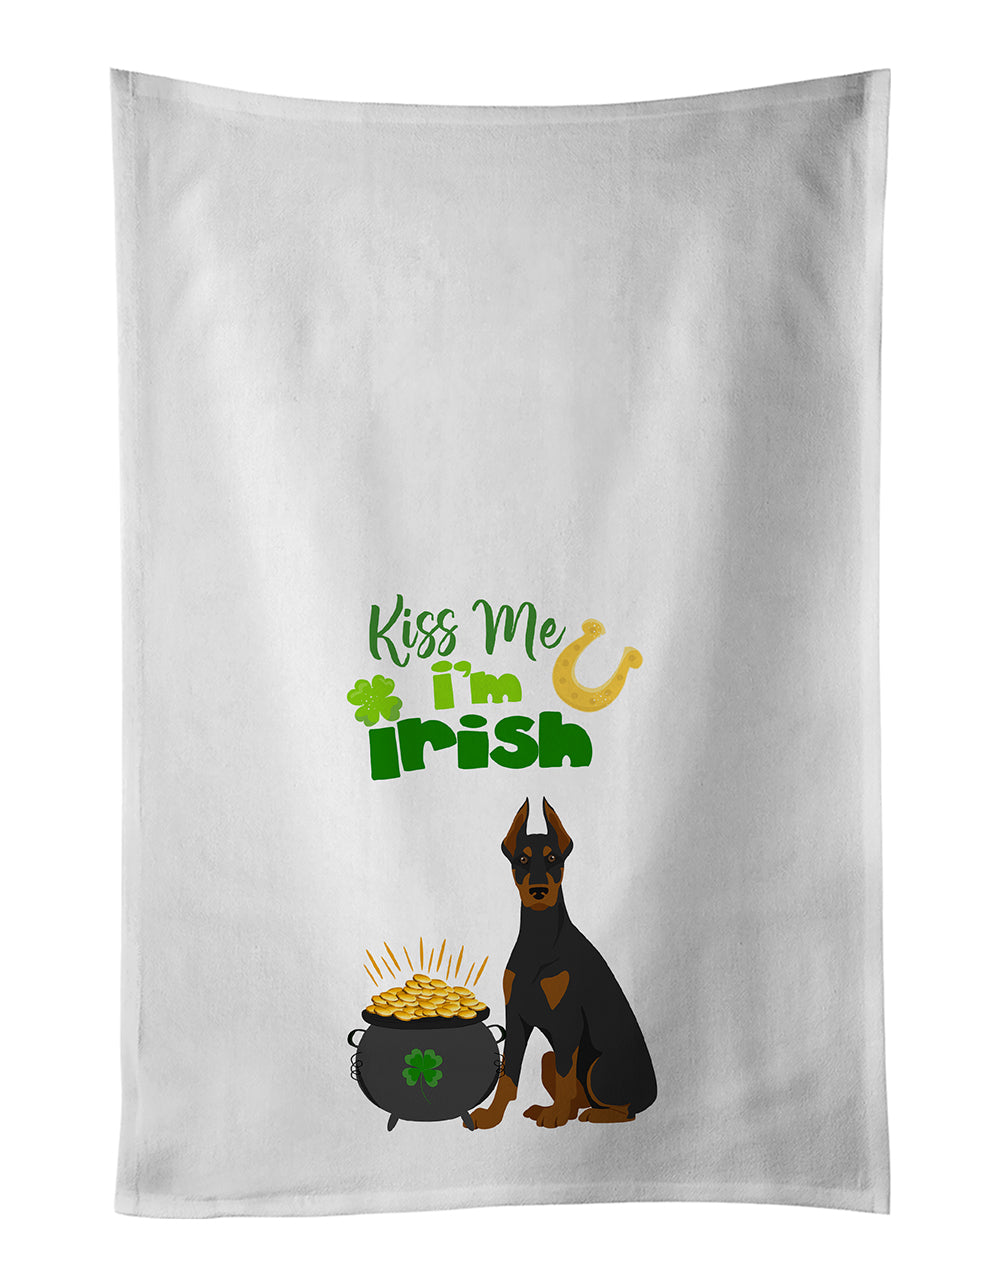 Buy this Black and Tan Doberman Pinscher St. Patrick's Day White Kitchen Towel Set of 2 Dish Towels